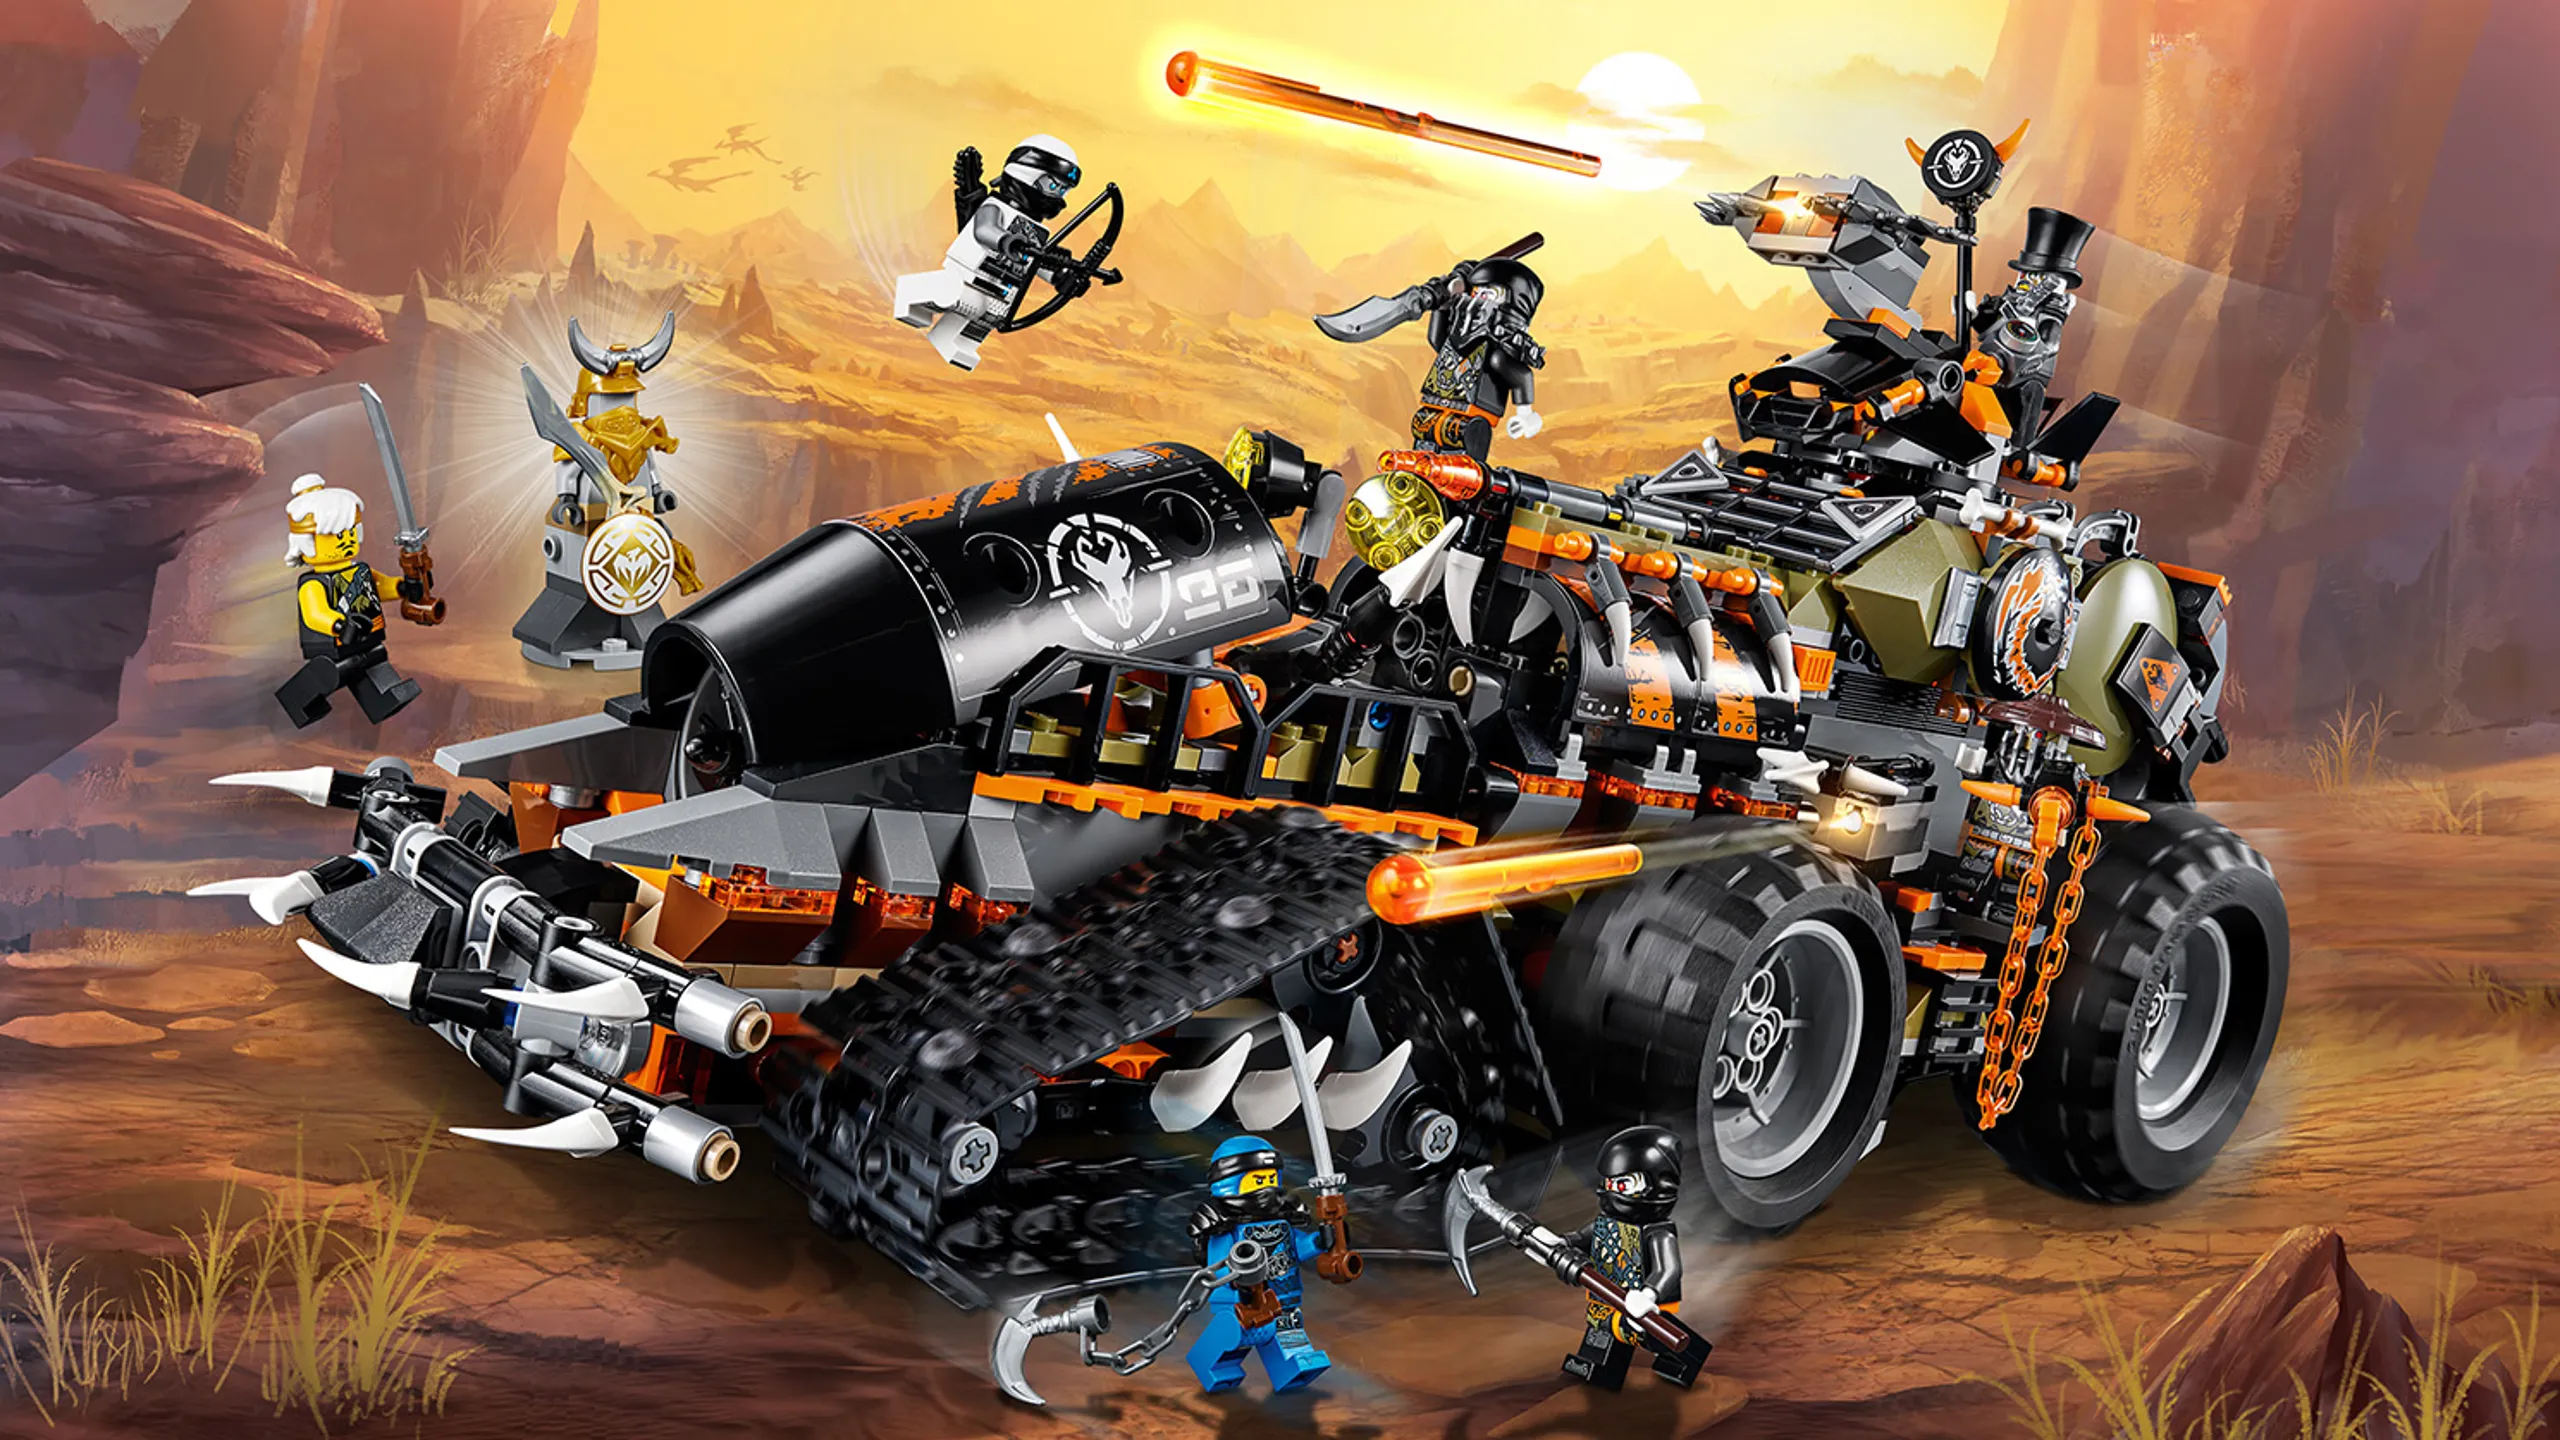 LEGO Ninjago - 70654 Dieselnaut - The evil dragon hunters attack the ninjas in their Dieselnaut tank in an attempt to claim the full Dragon Armour.